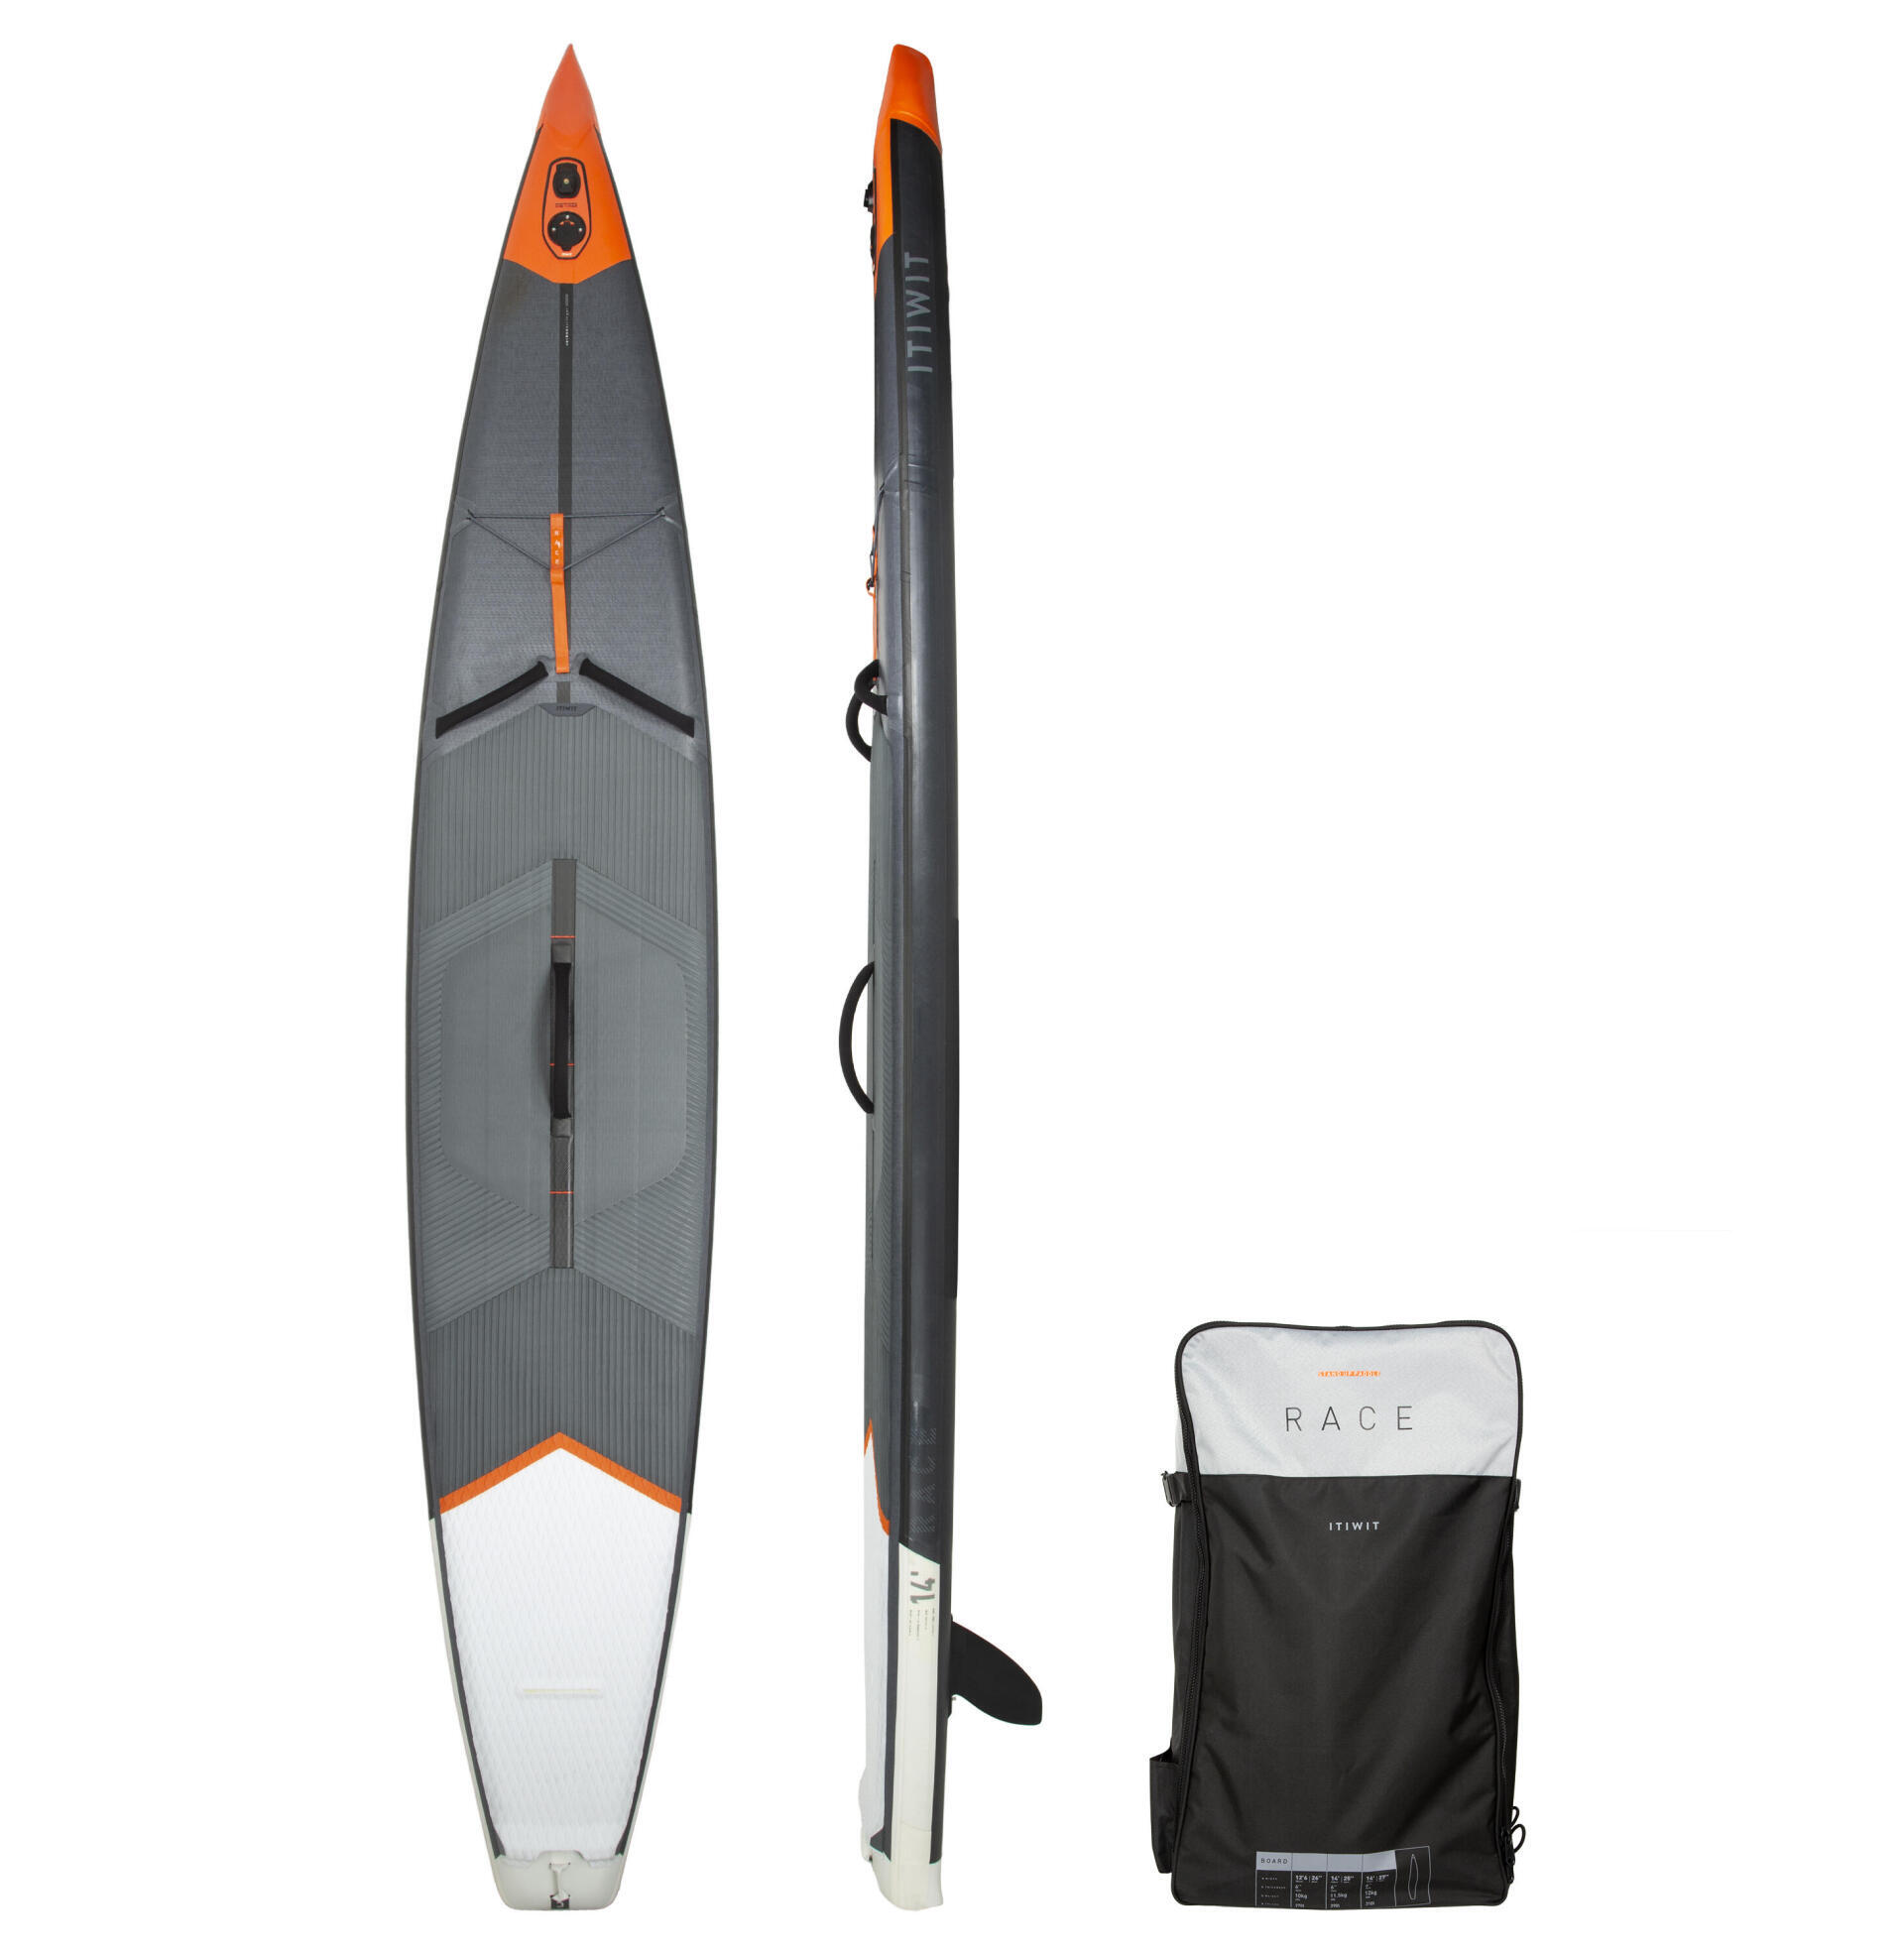 14' competition stand-up paddle board